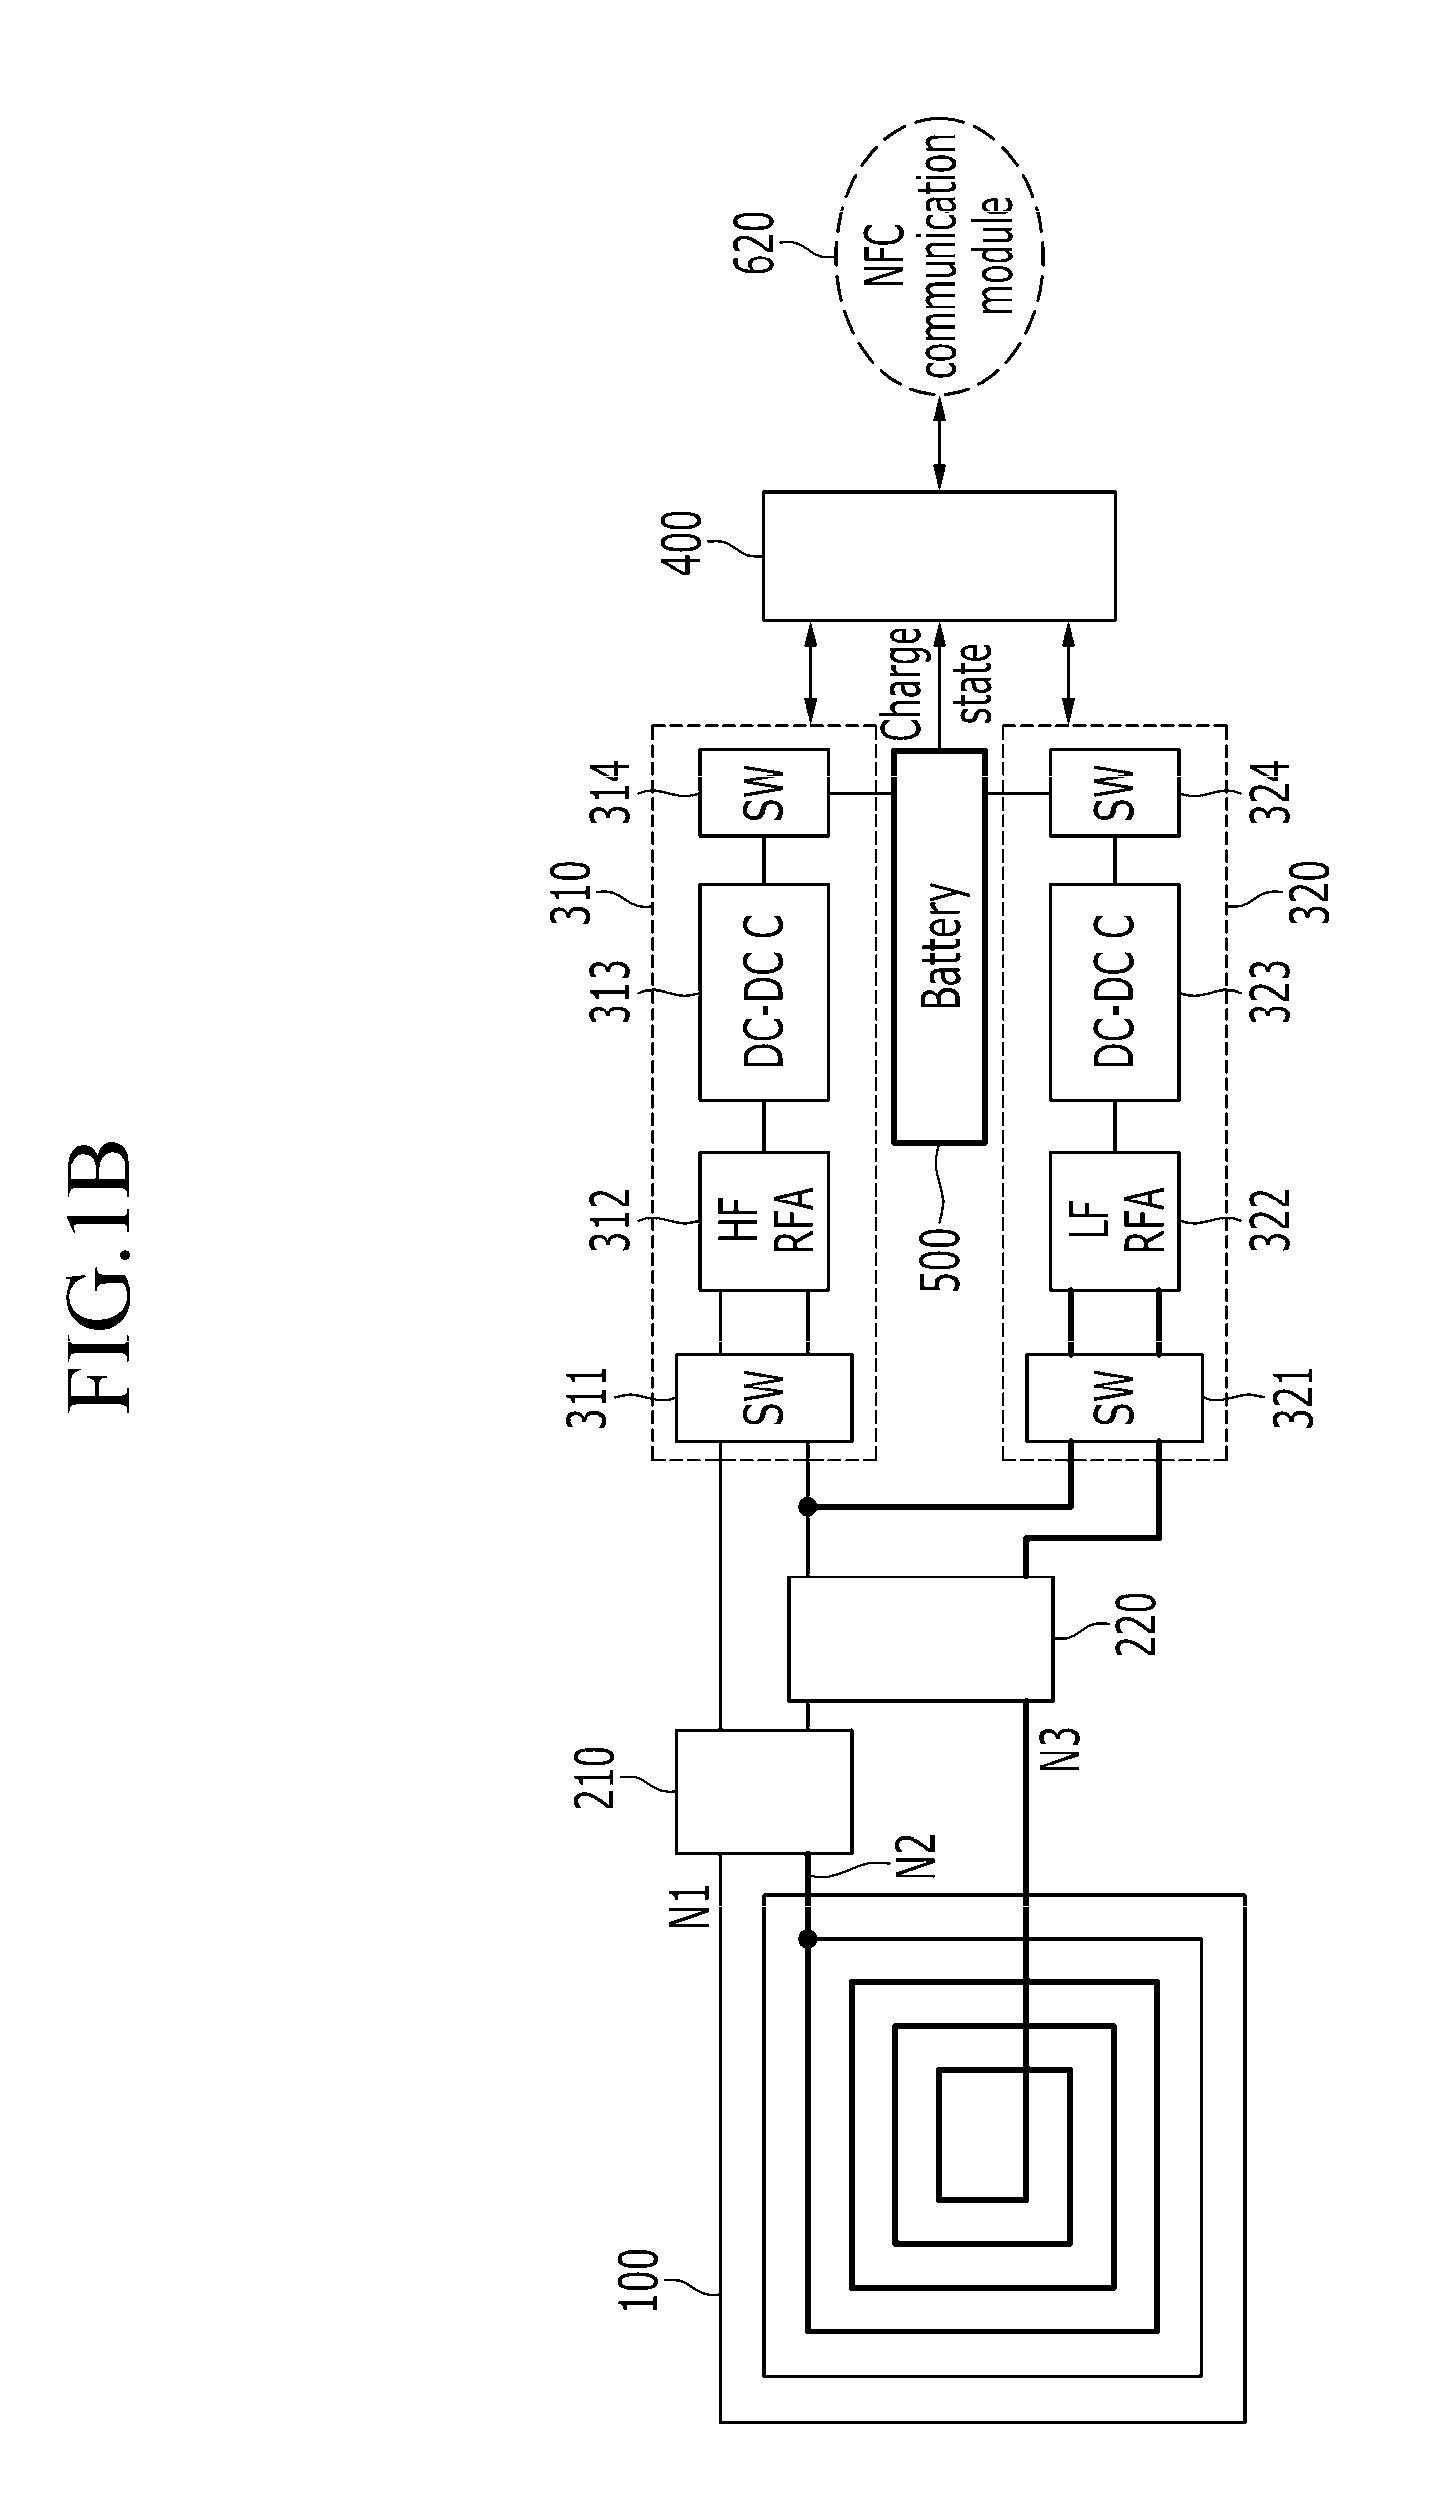 Apparatus and method for wireless charging